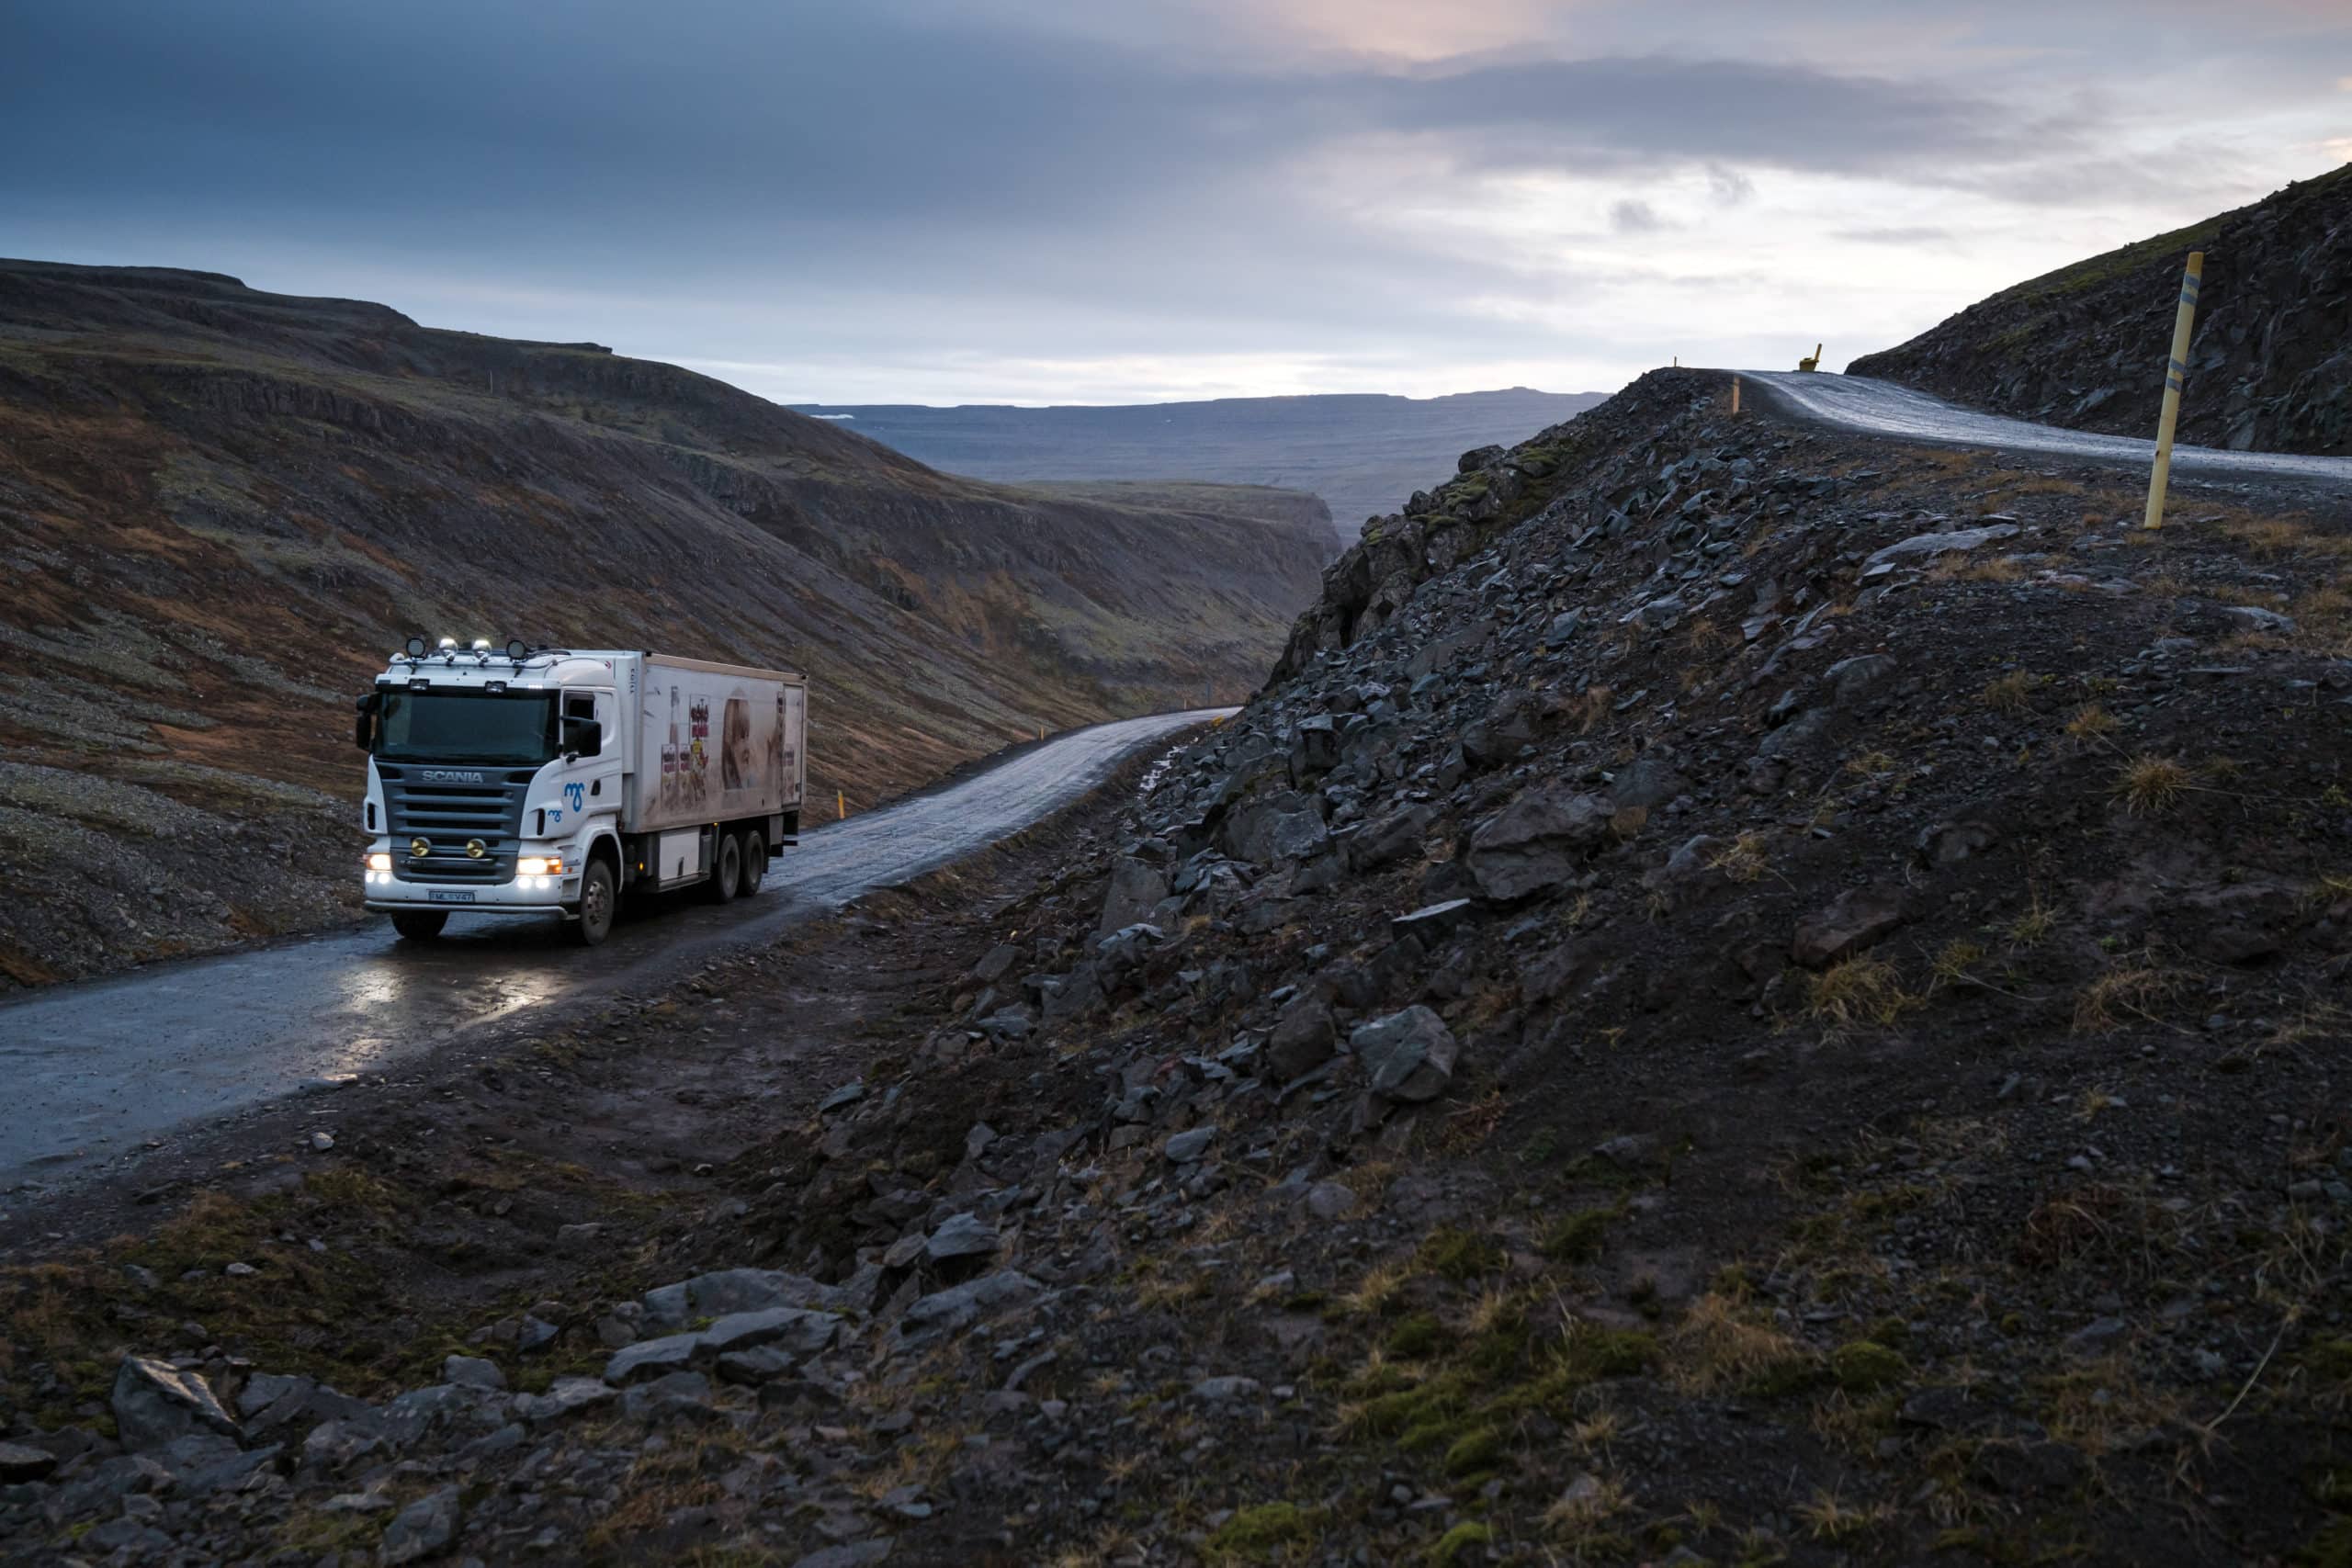 The local milk truck drving across the winding roads of the Westfjords